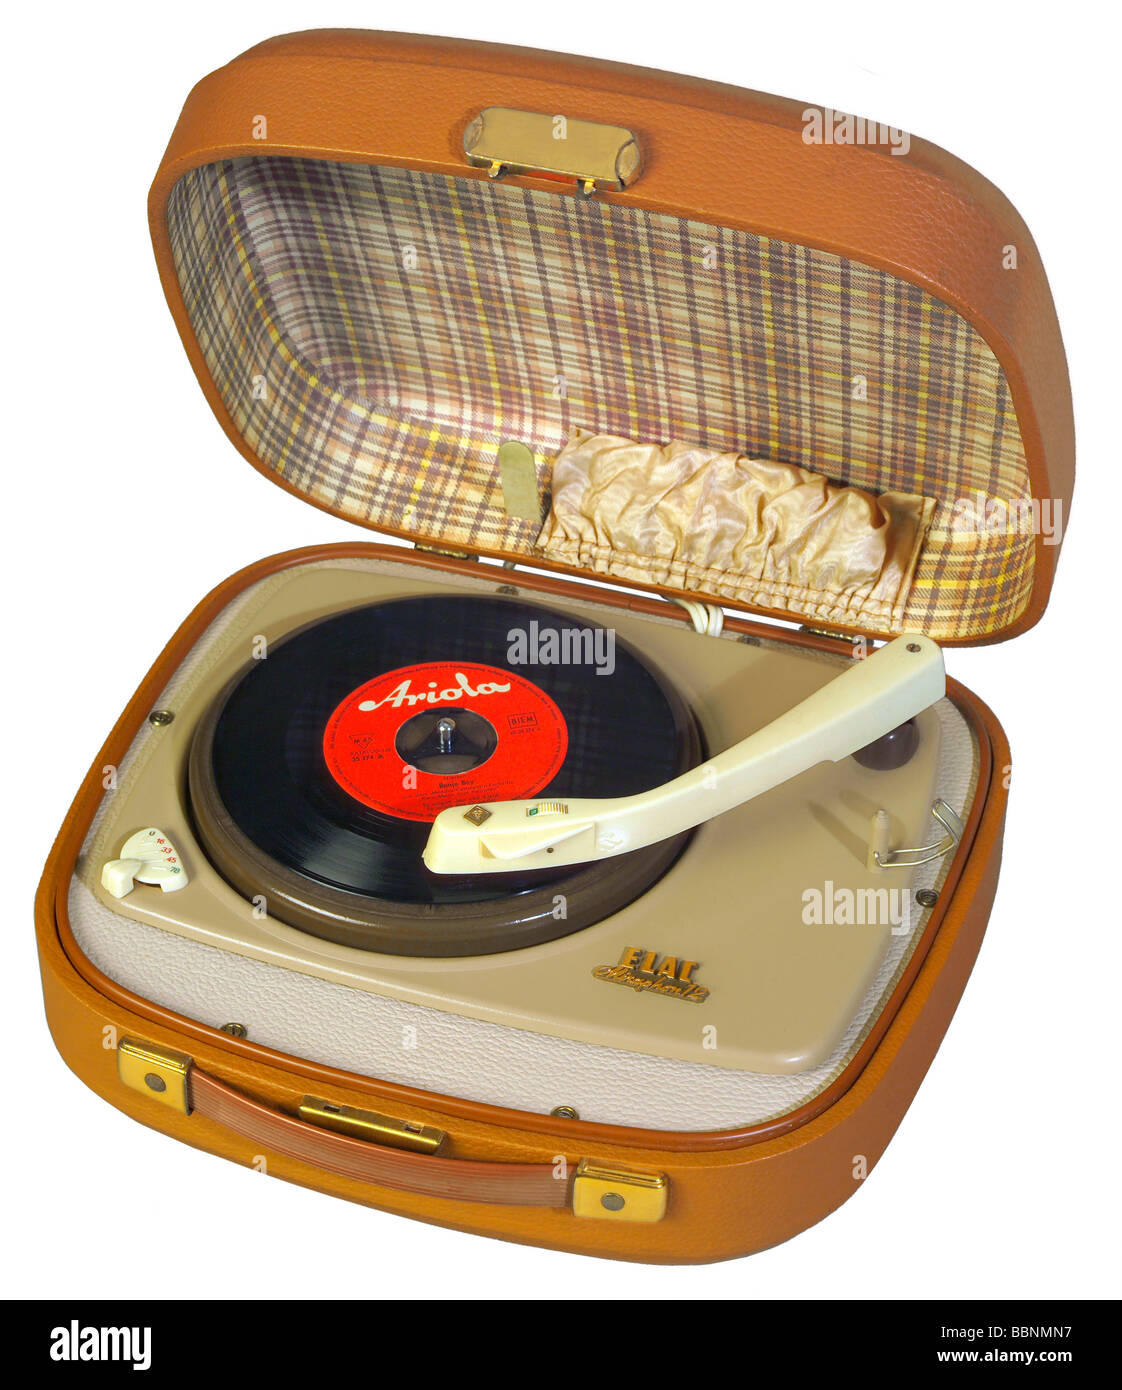 Technics, record player, ELAC typ Miraphon 12, Germania, circa 1959, prodable, made by Electroacustic GmbH Kiel, records, audio, phono, esponat Klingenden Museum Riedenburg, clipping, cut out, 1950s, 50s, storico, storico, 20th secolo, single record, Ariola, cut-out, cut-outs, Foto Stock